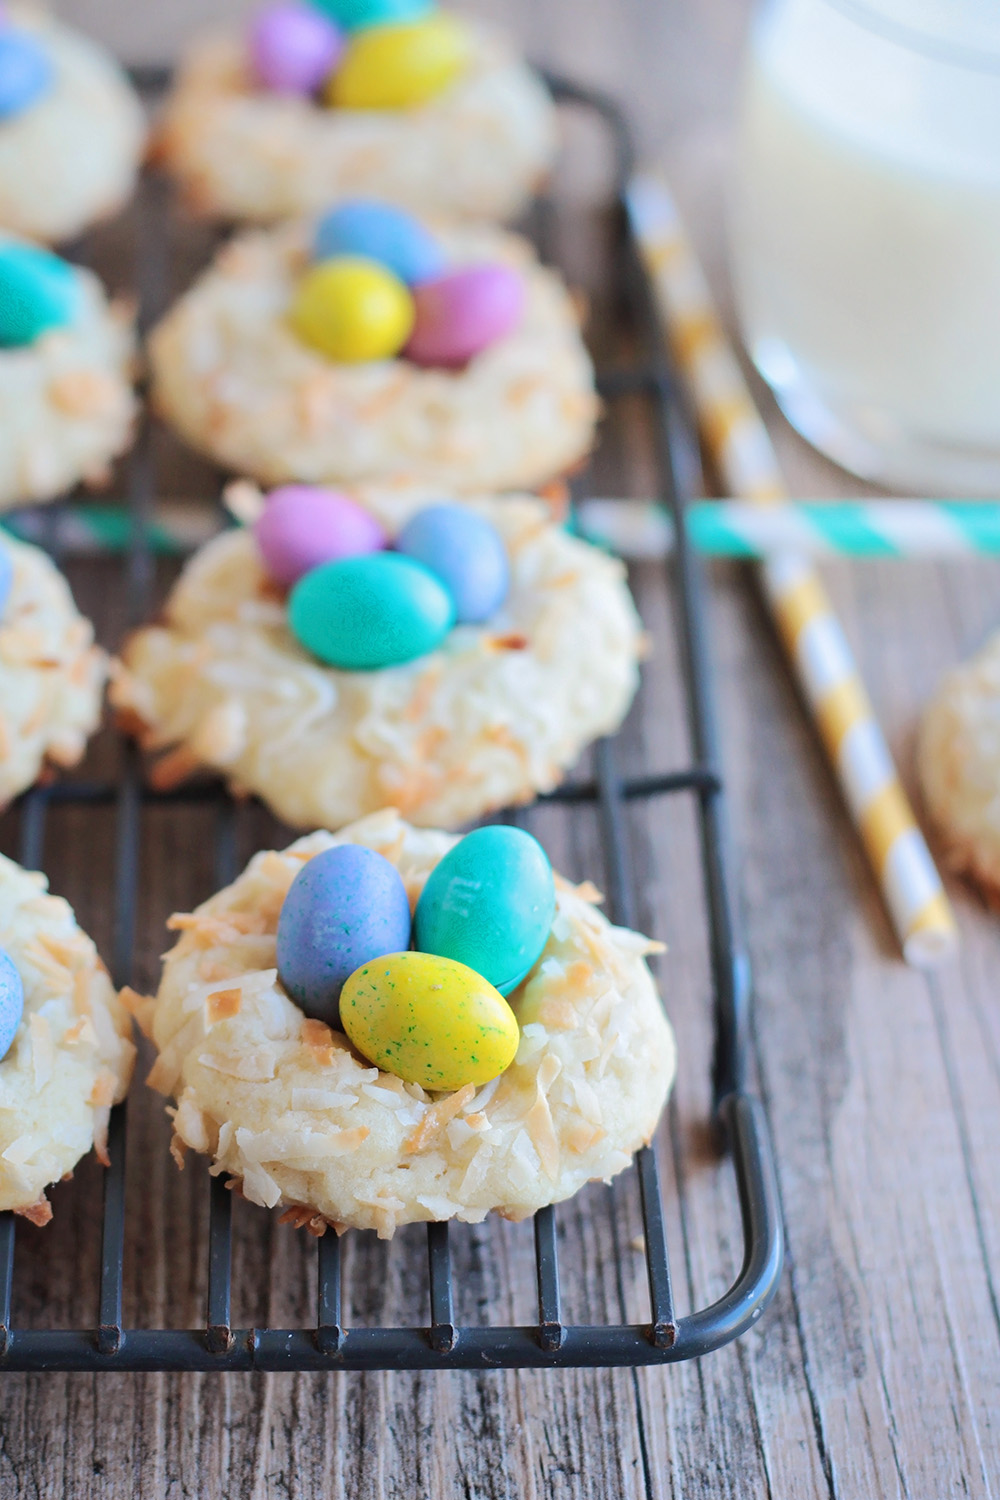 These colorful and delicious bird's nest cookies are perfect for celebrating spring!